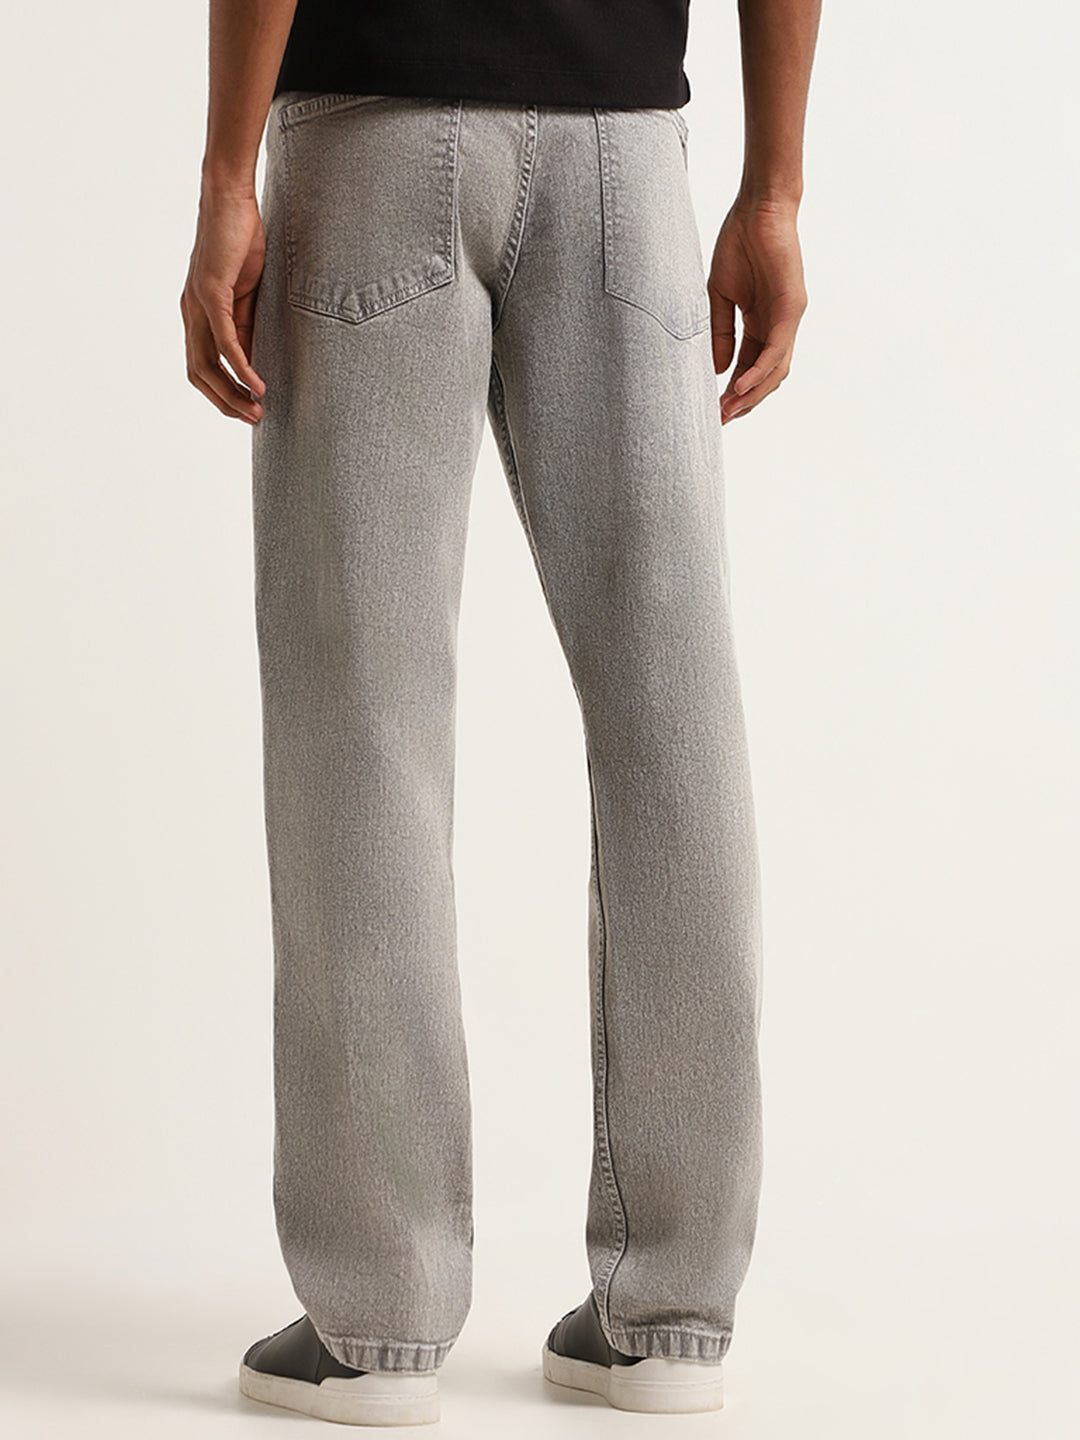 Nuon Faded Grey Straight-Leg Mid-Rise Jeans